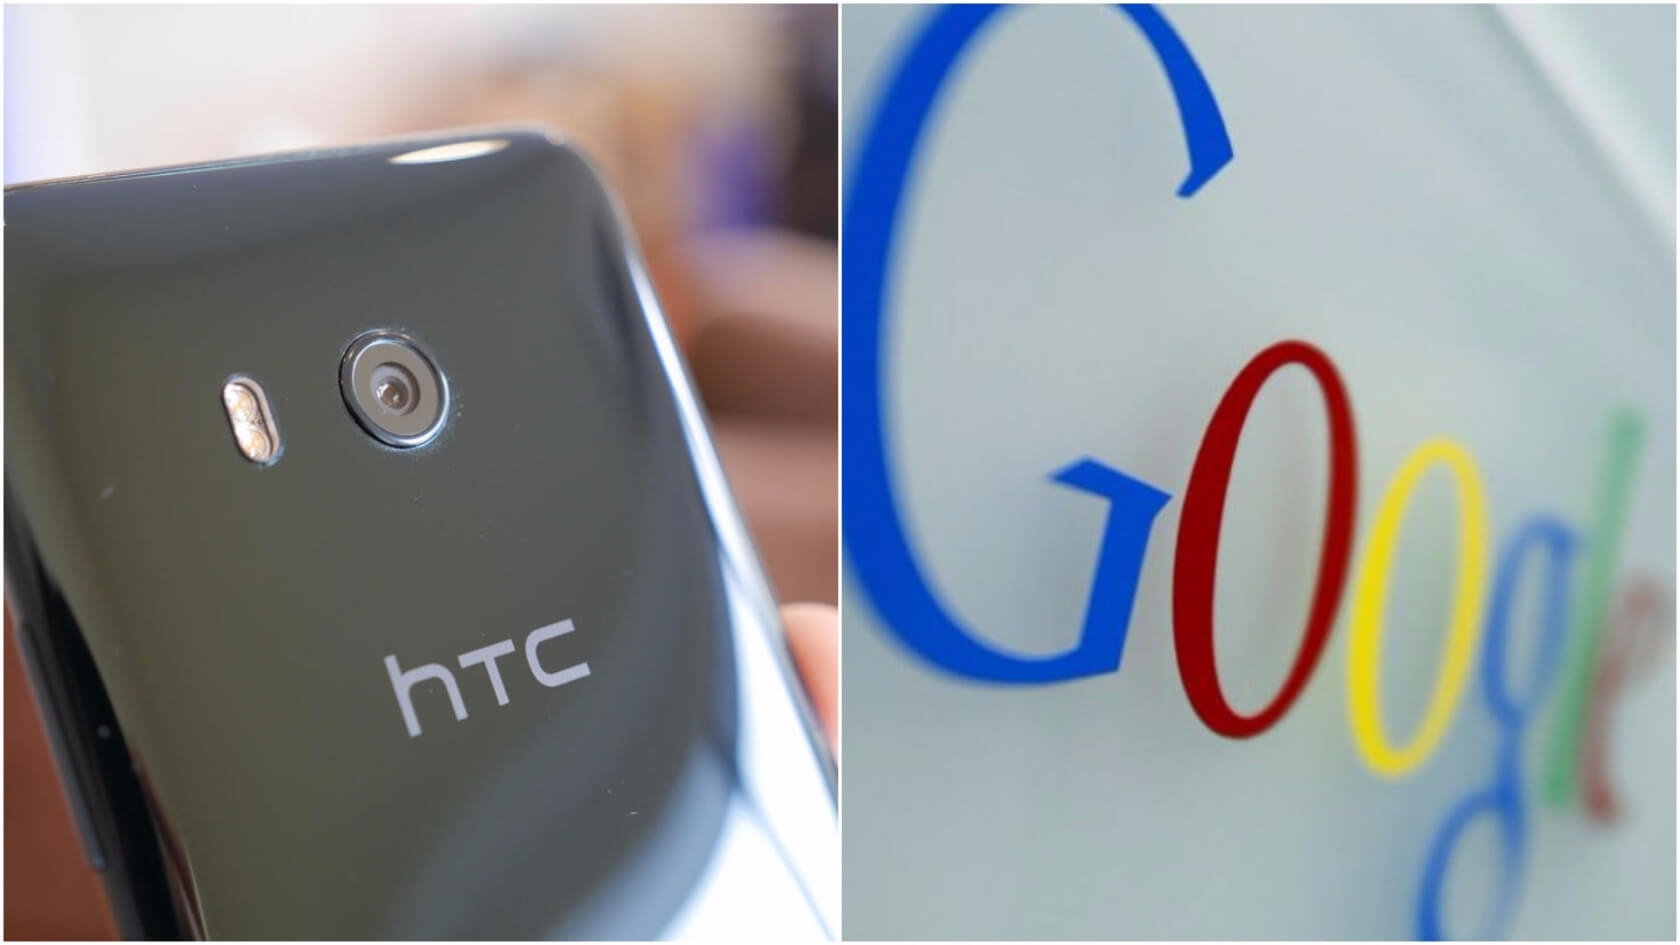 News Of Google's HTC Investment Could Come Thursday | DeviceDaily.com